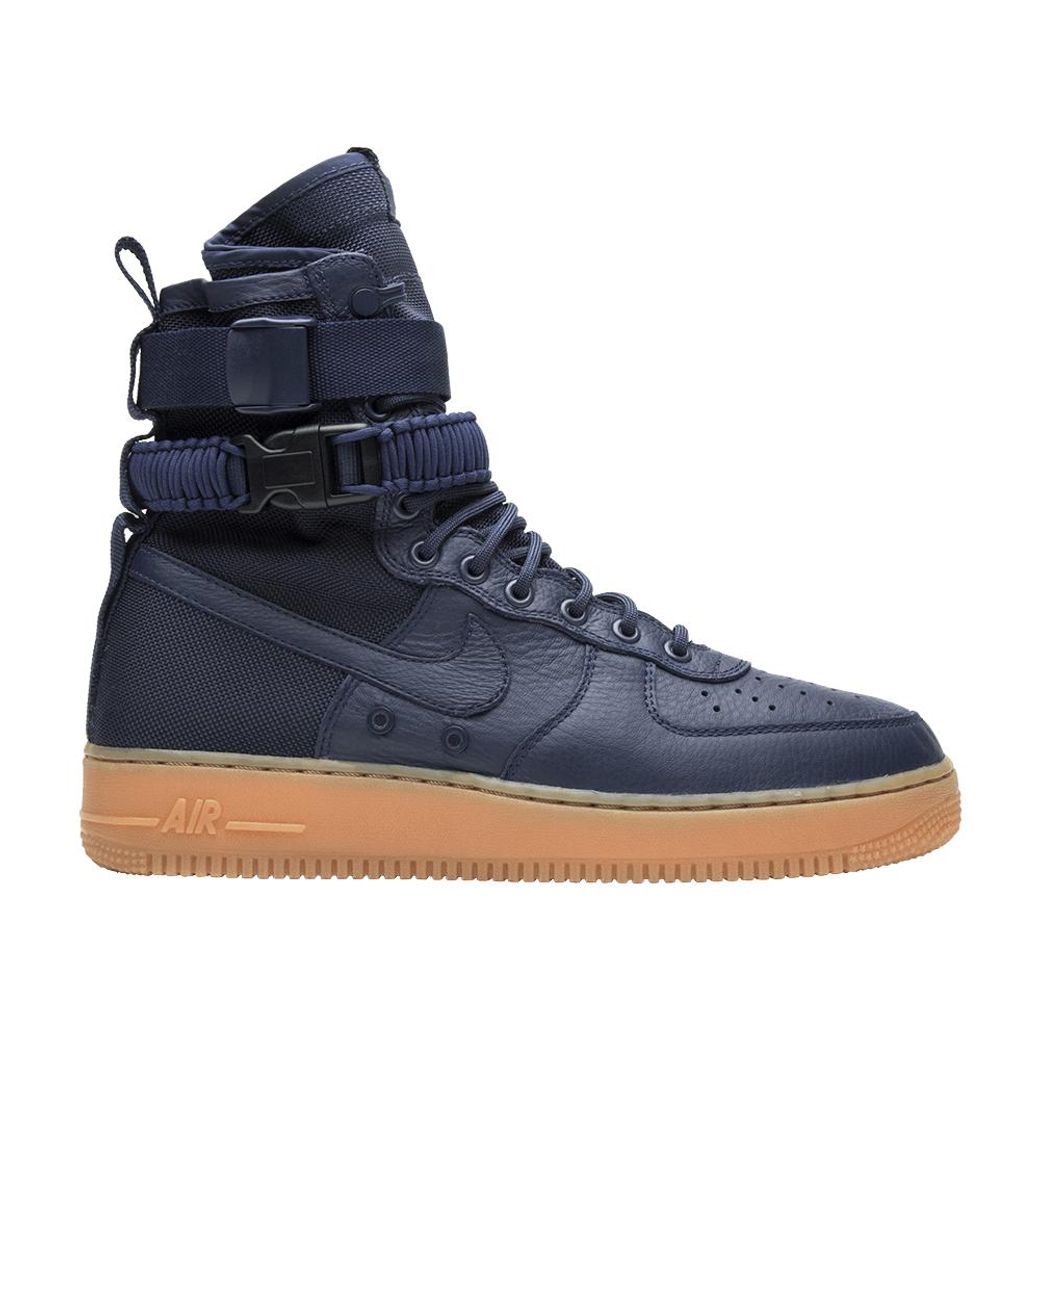 Nike Air Force 1 in Blue for Men - Lyst